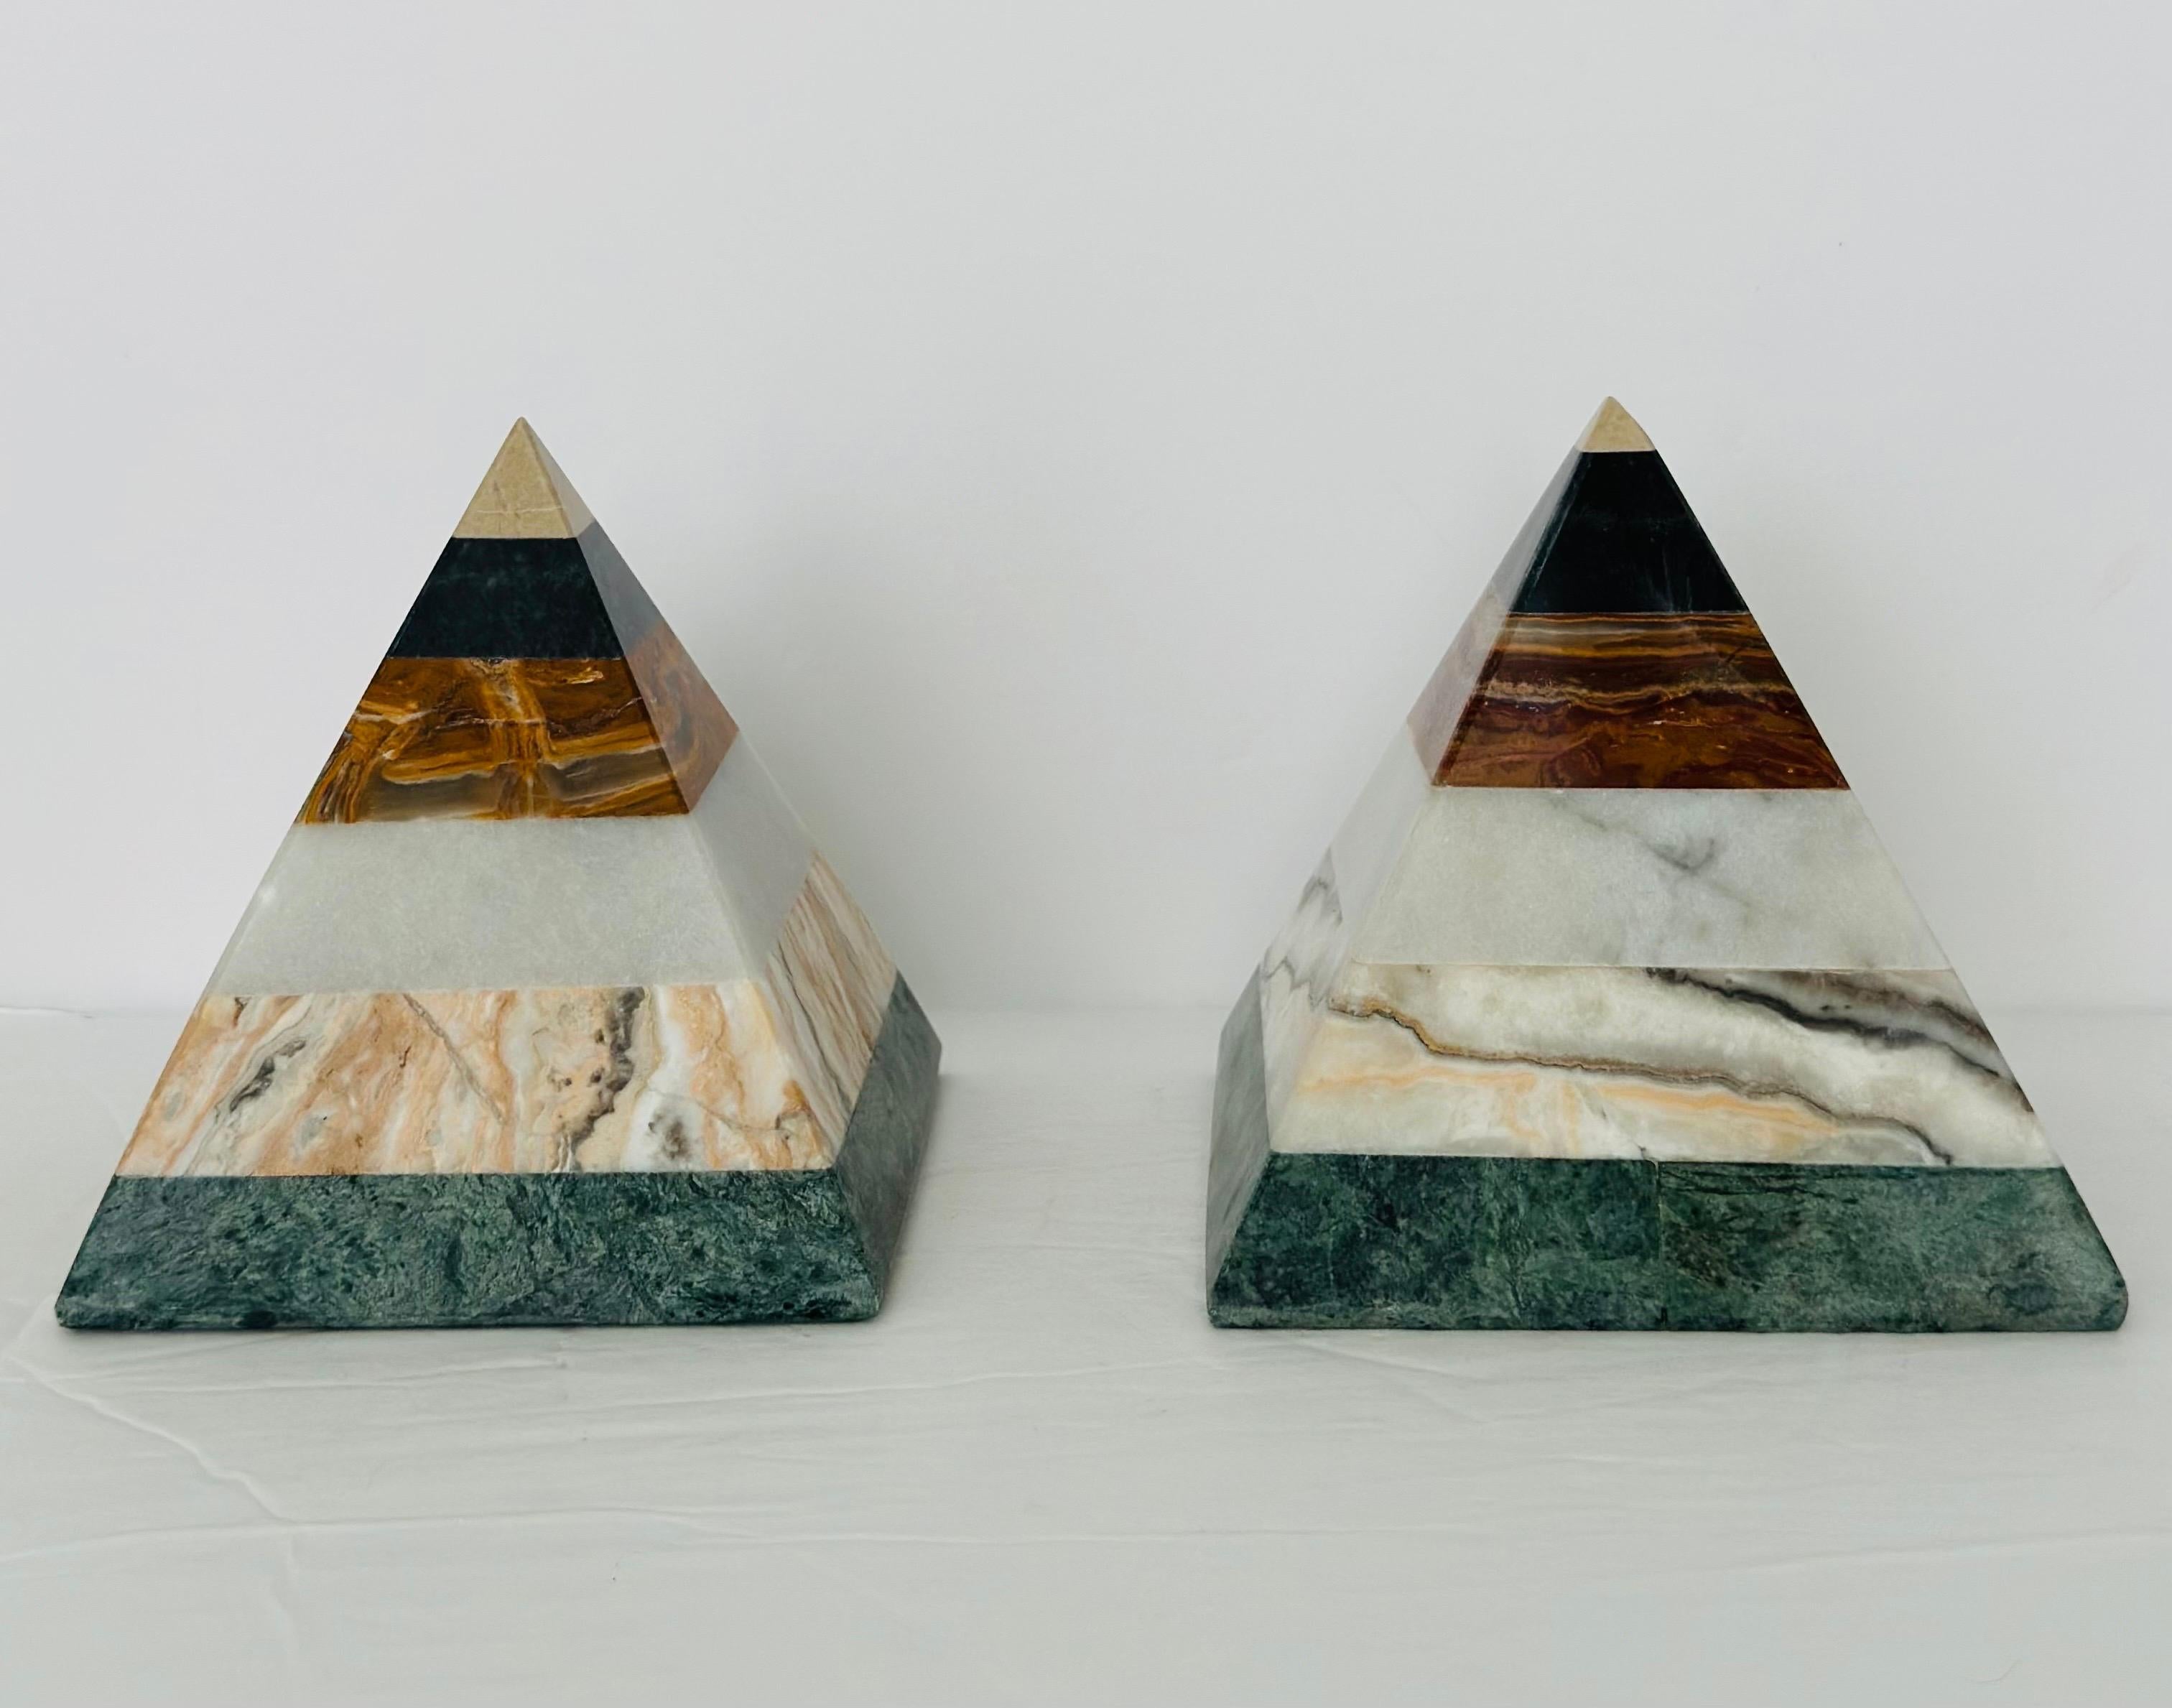 We are very pleased to offer a stunning pyramid sculpture set, circa the 1970s.  Crafted with meticulous attention to detail, each facet is carefully carved and polished to perfection.  These pyramids are not made of traditional materials like stone